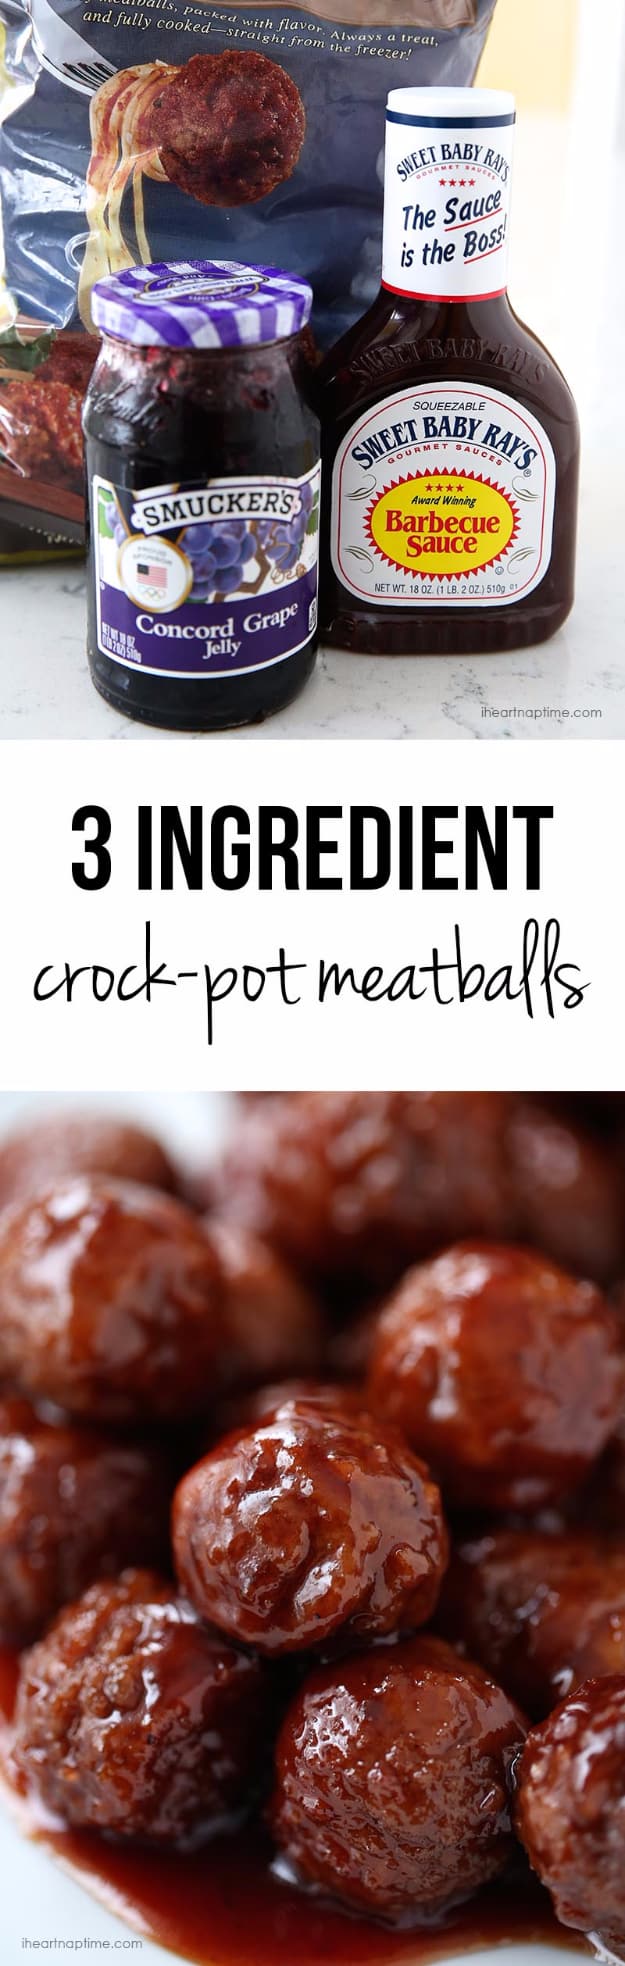 33 Easy Three Ingredient Recipes - 3 Ingredient Crock Pot Meatballs - Quick And Healthy 3 Ingredients Recipe Ideas for Breakfast, Lunch, Dinner, Appetizers, Snacks and Desserts - Cookies, Chicken, Crockpot Ideas, Baking and Microwave Recipes and Tutorials #easyrecipes #quickrecipes